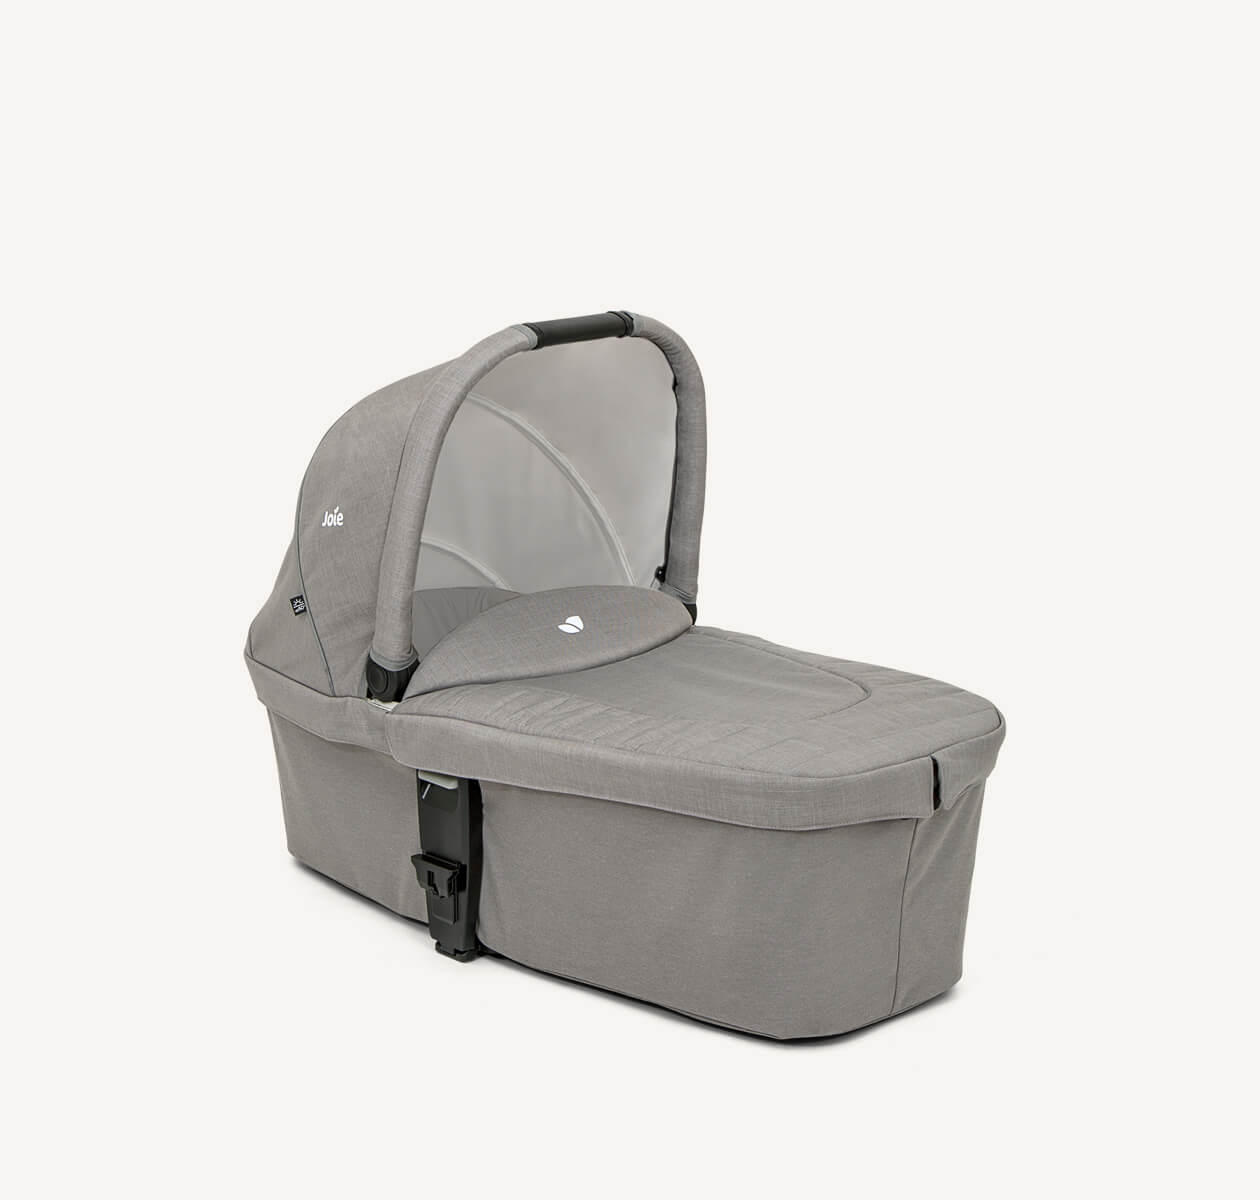  Joie chrome carry cot in light gray at a right angle. 